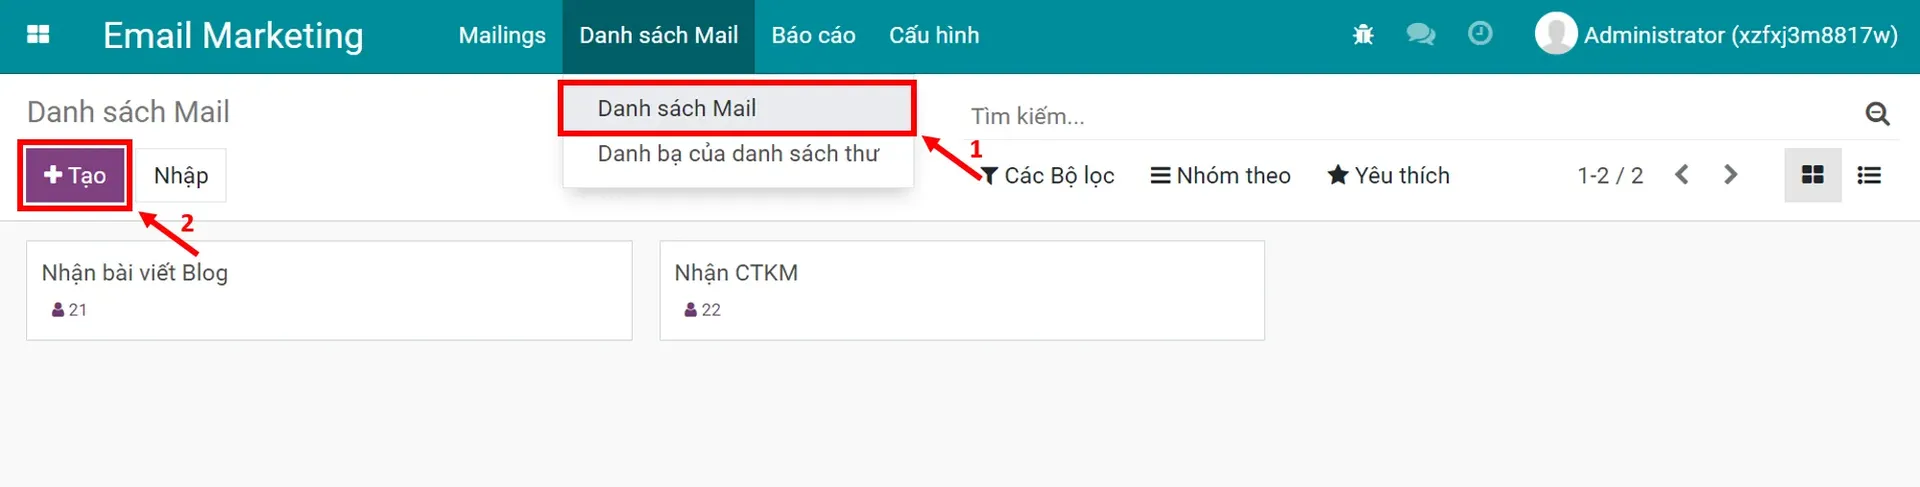 Tao-danh-sach-mail-moi-trong-ung-dung-Email-Marketing-cua-Odoo-ERPOnline